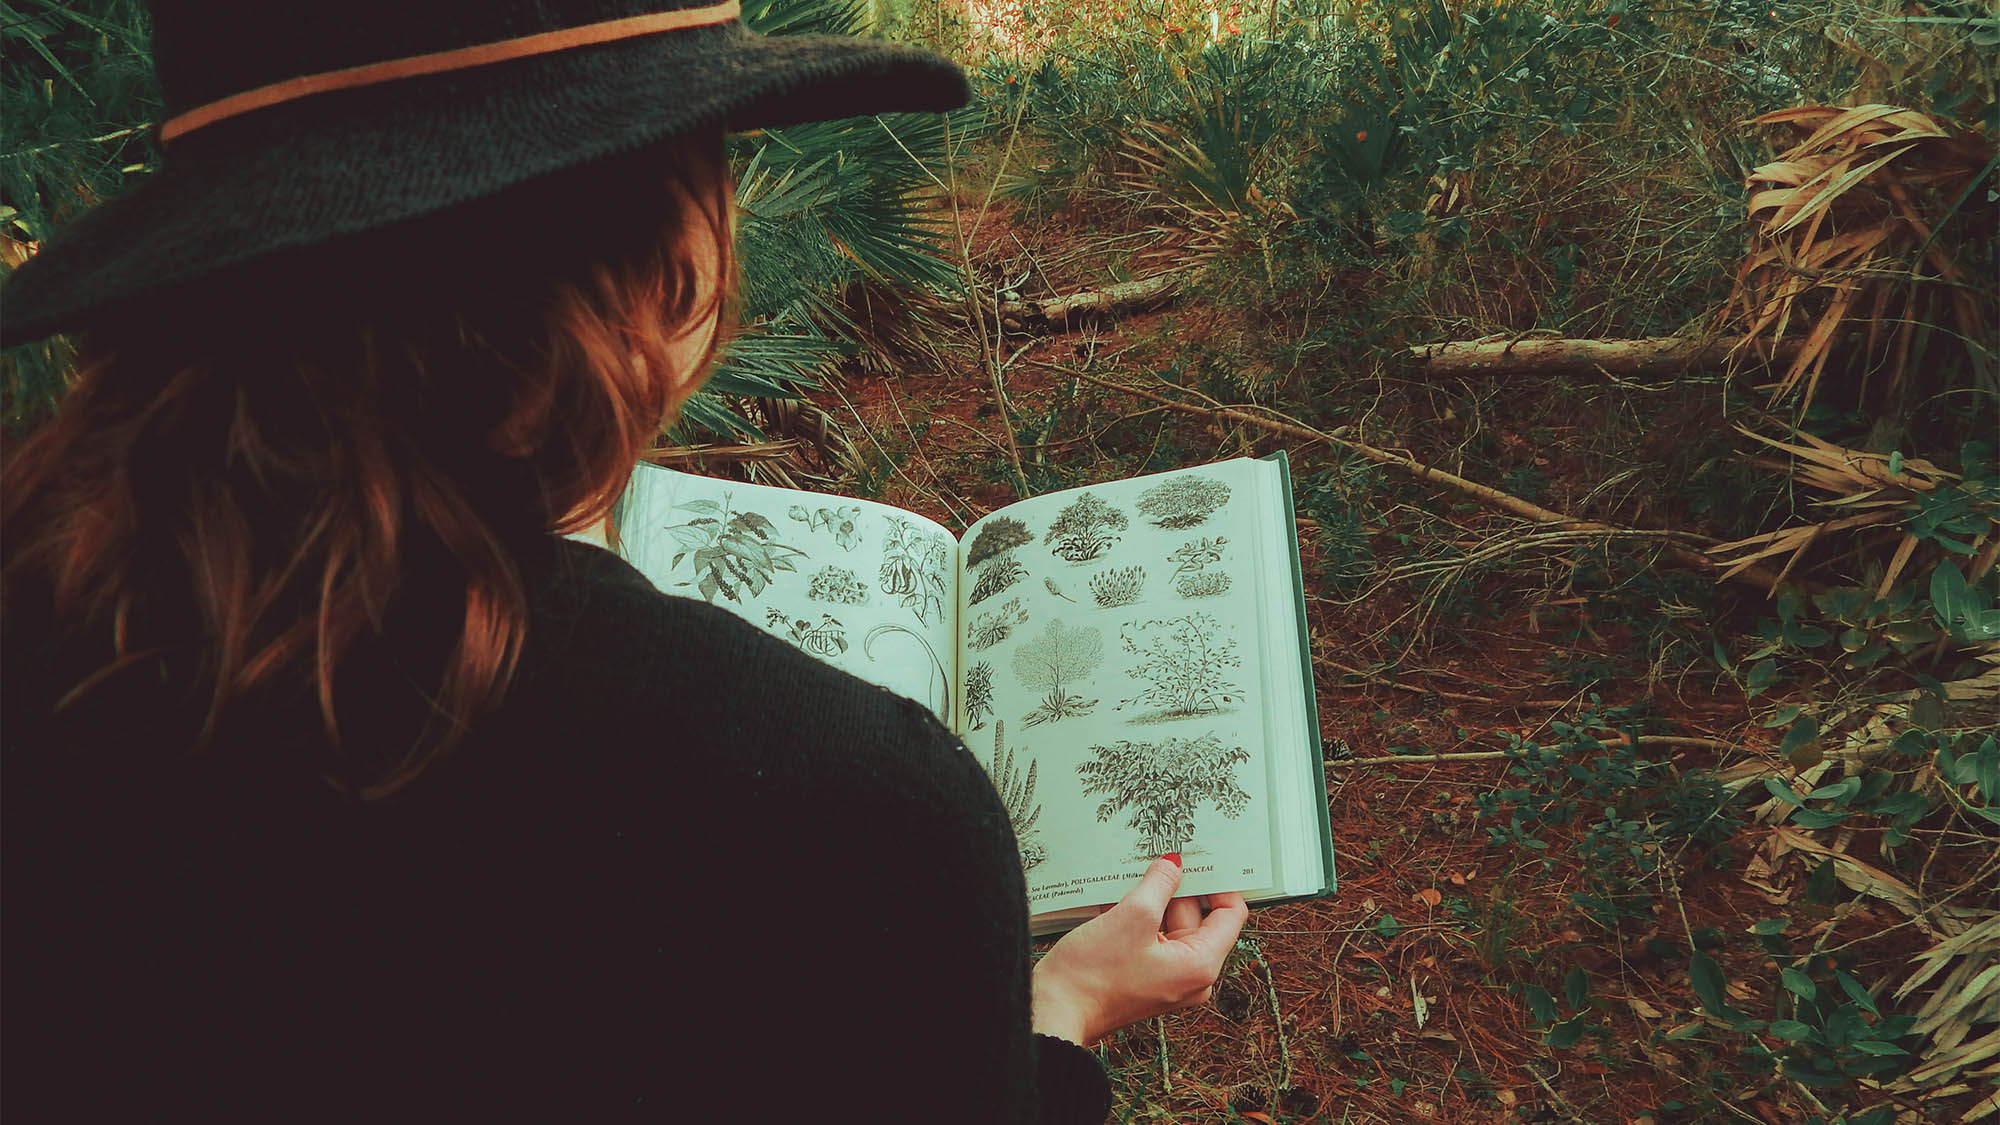 Woman Outside Holding Plant Book From Back